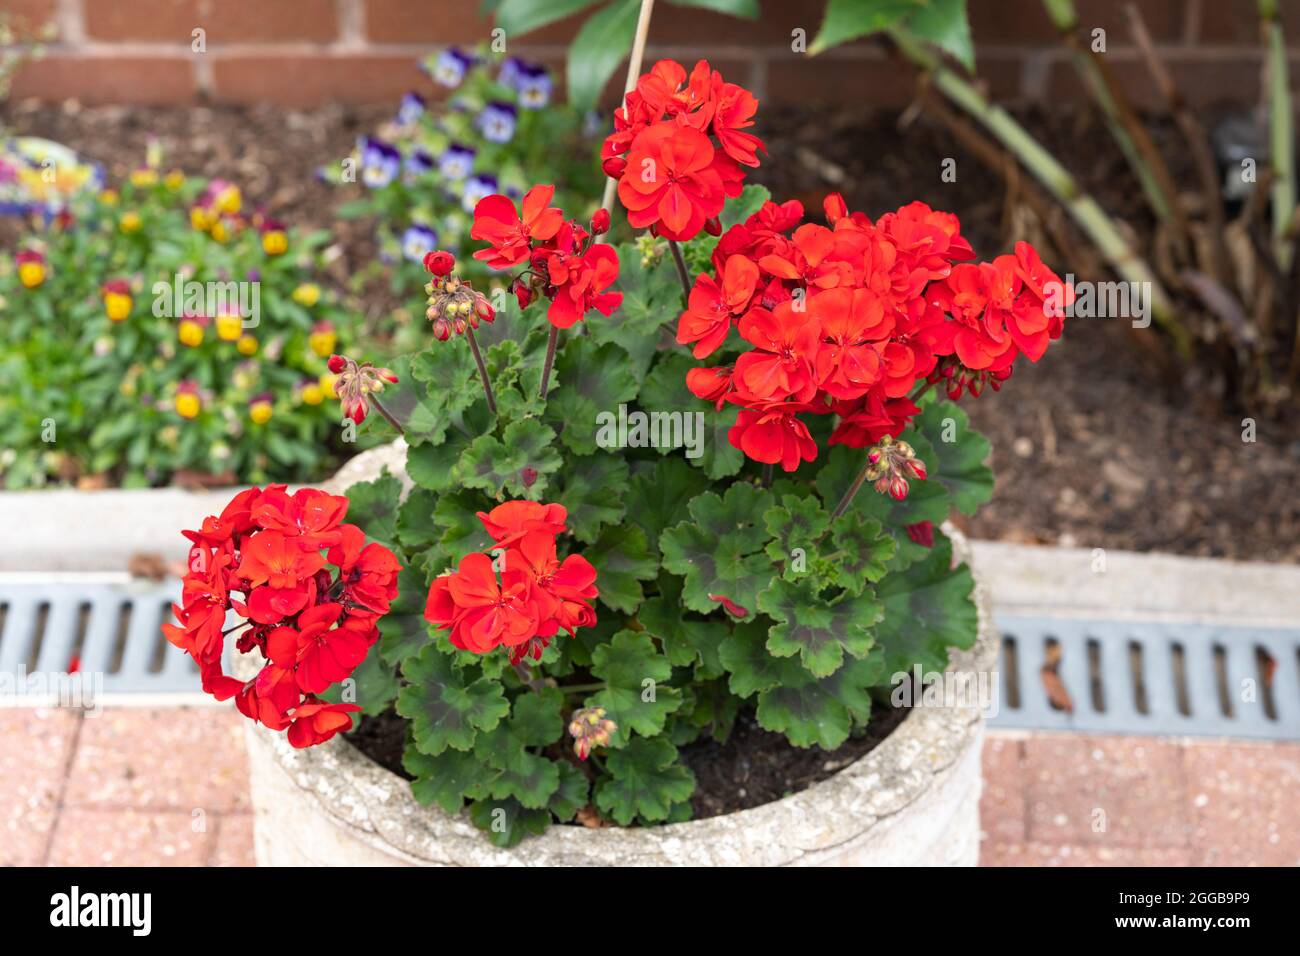 Upright Geranium Velvet Red with red flowers and variegated green leaves growing in a plant pot in an English garden and flowering in August Stock Photo